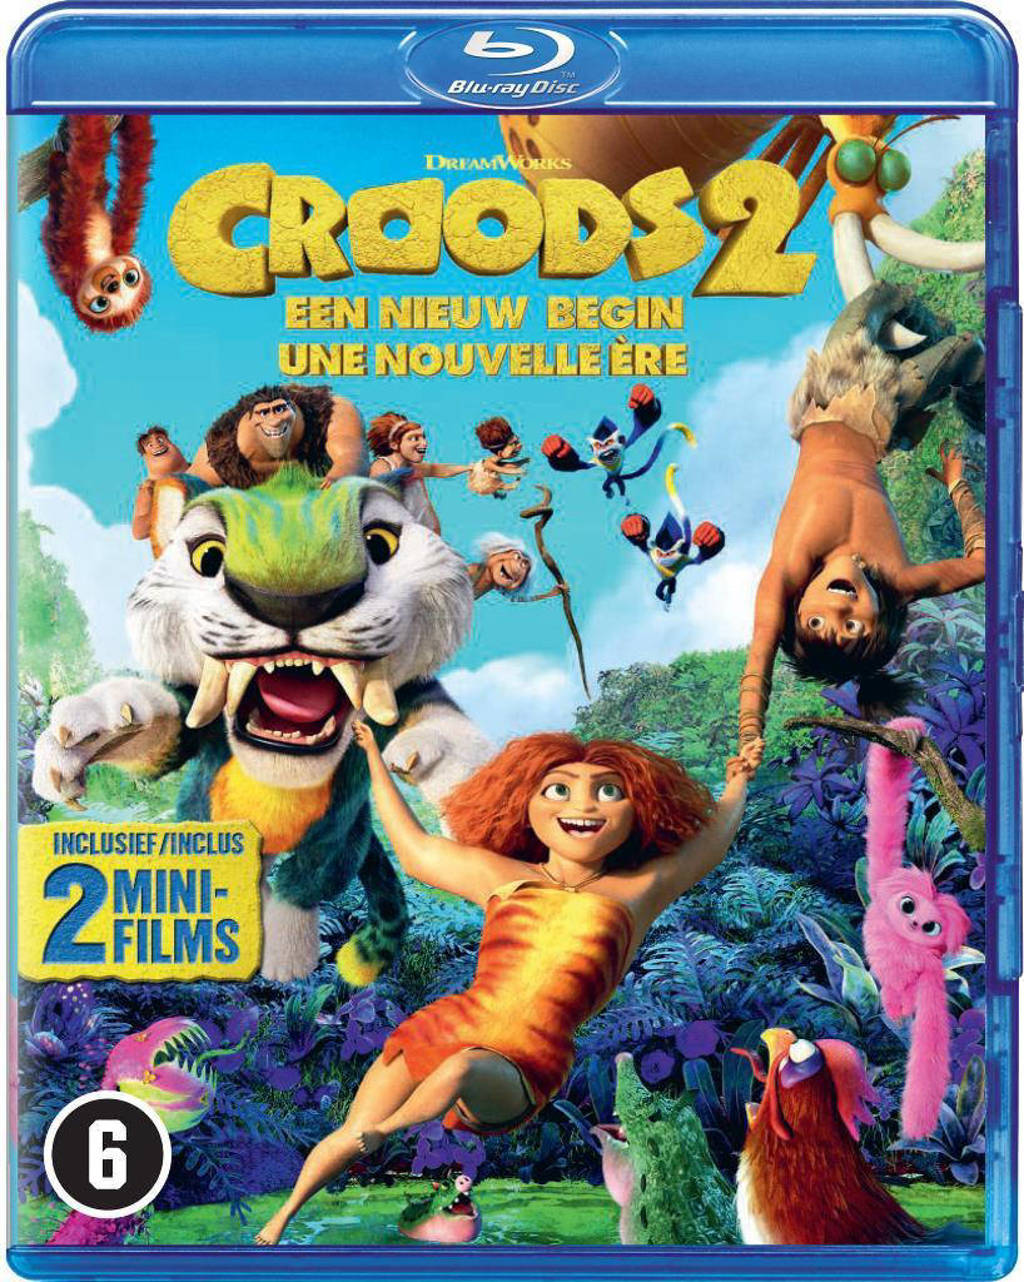 Croods 2 - A New Age (Blu-ray)